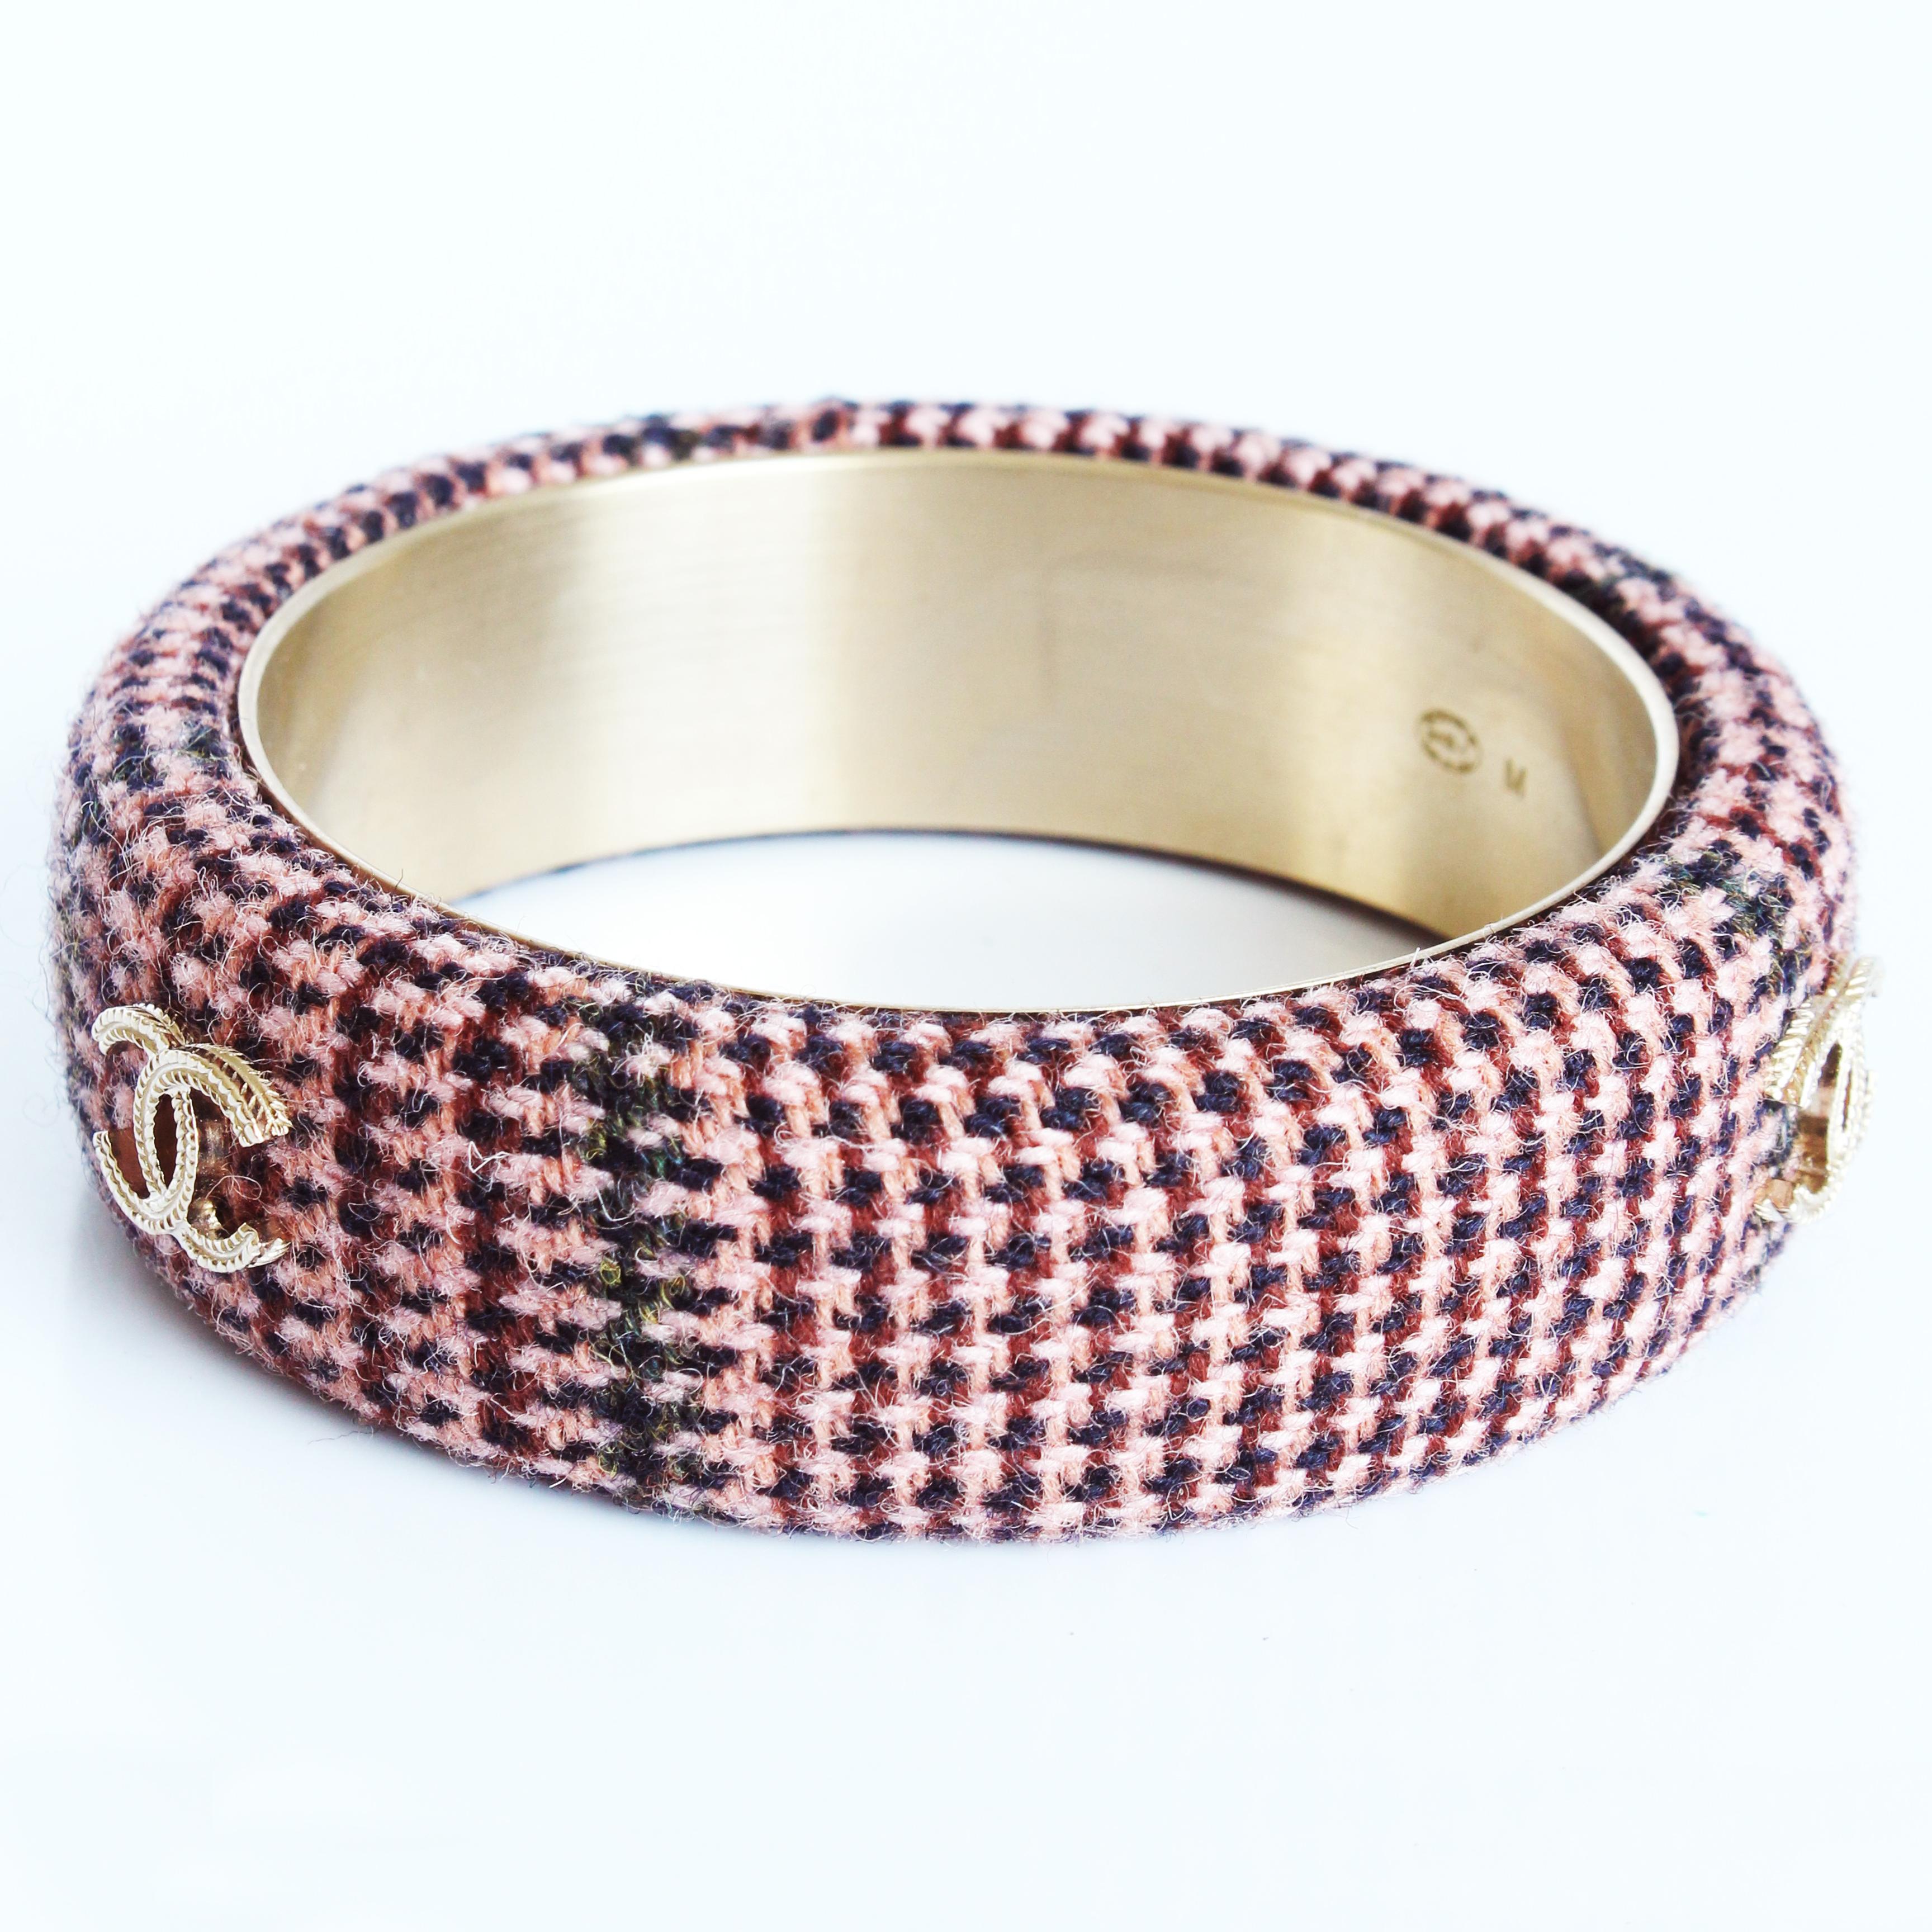 Chanel Bracelet Bangle 13A Pink Multicolor Tweed Knit with Gold CC Logo in Box  For Sale 2